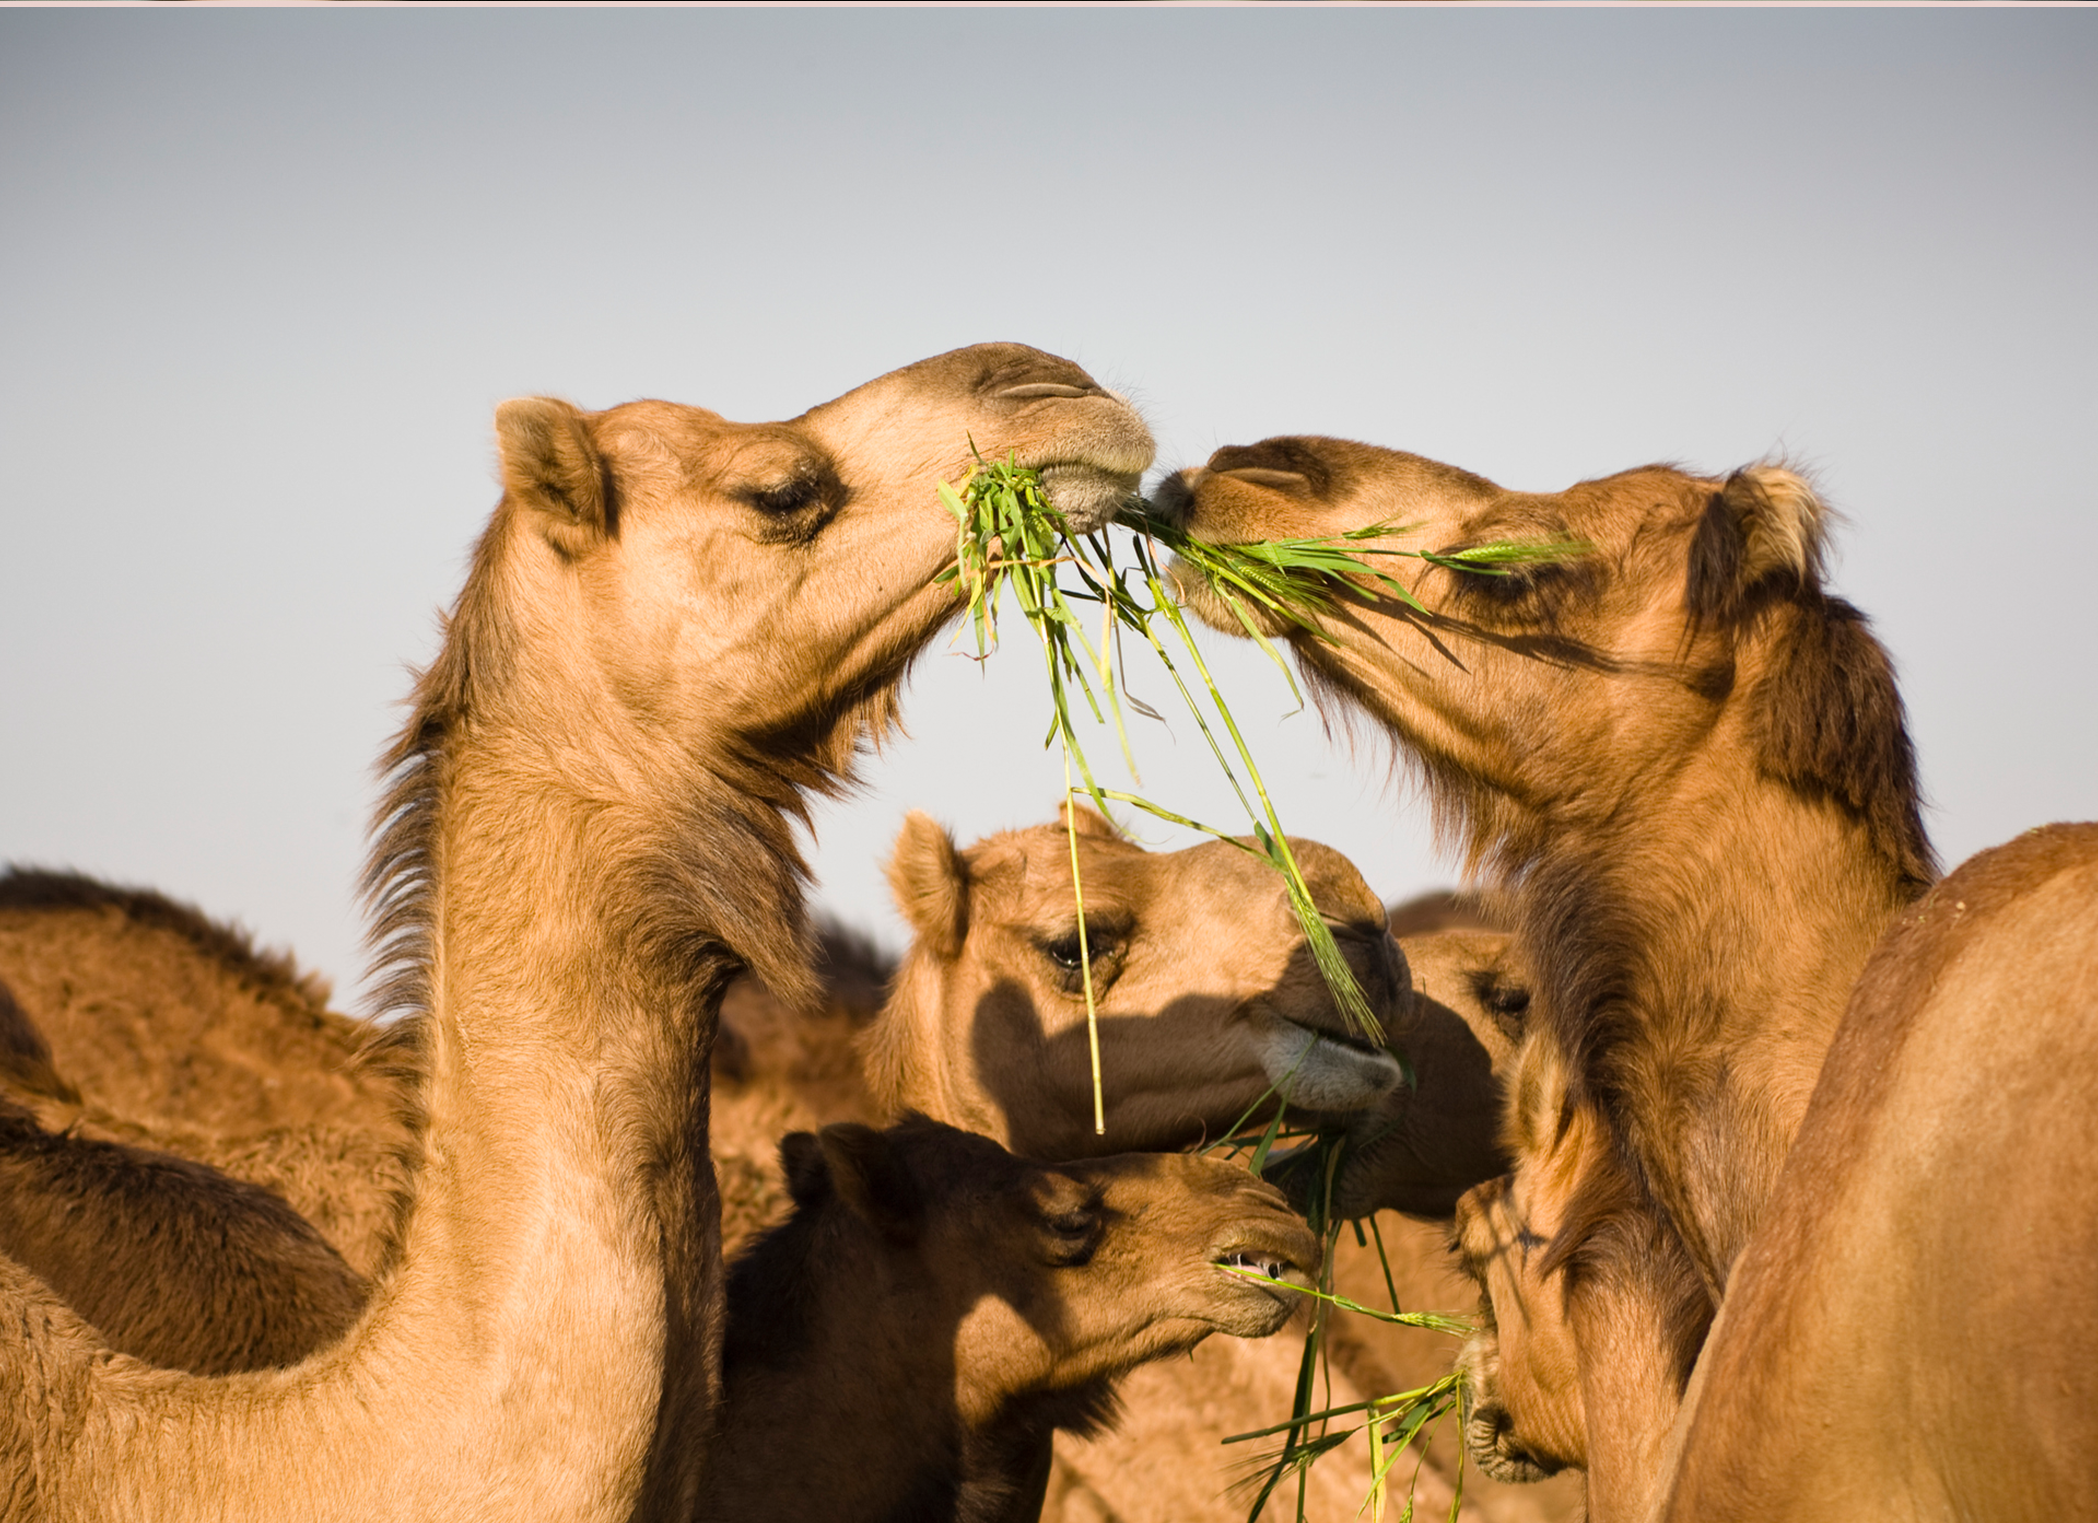 Two camels eating grass